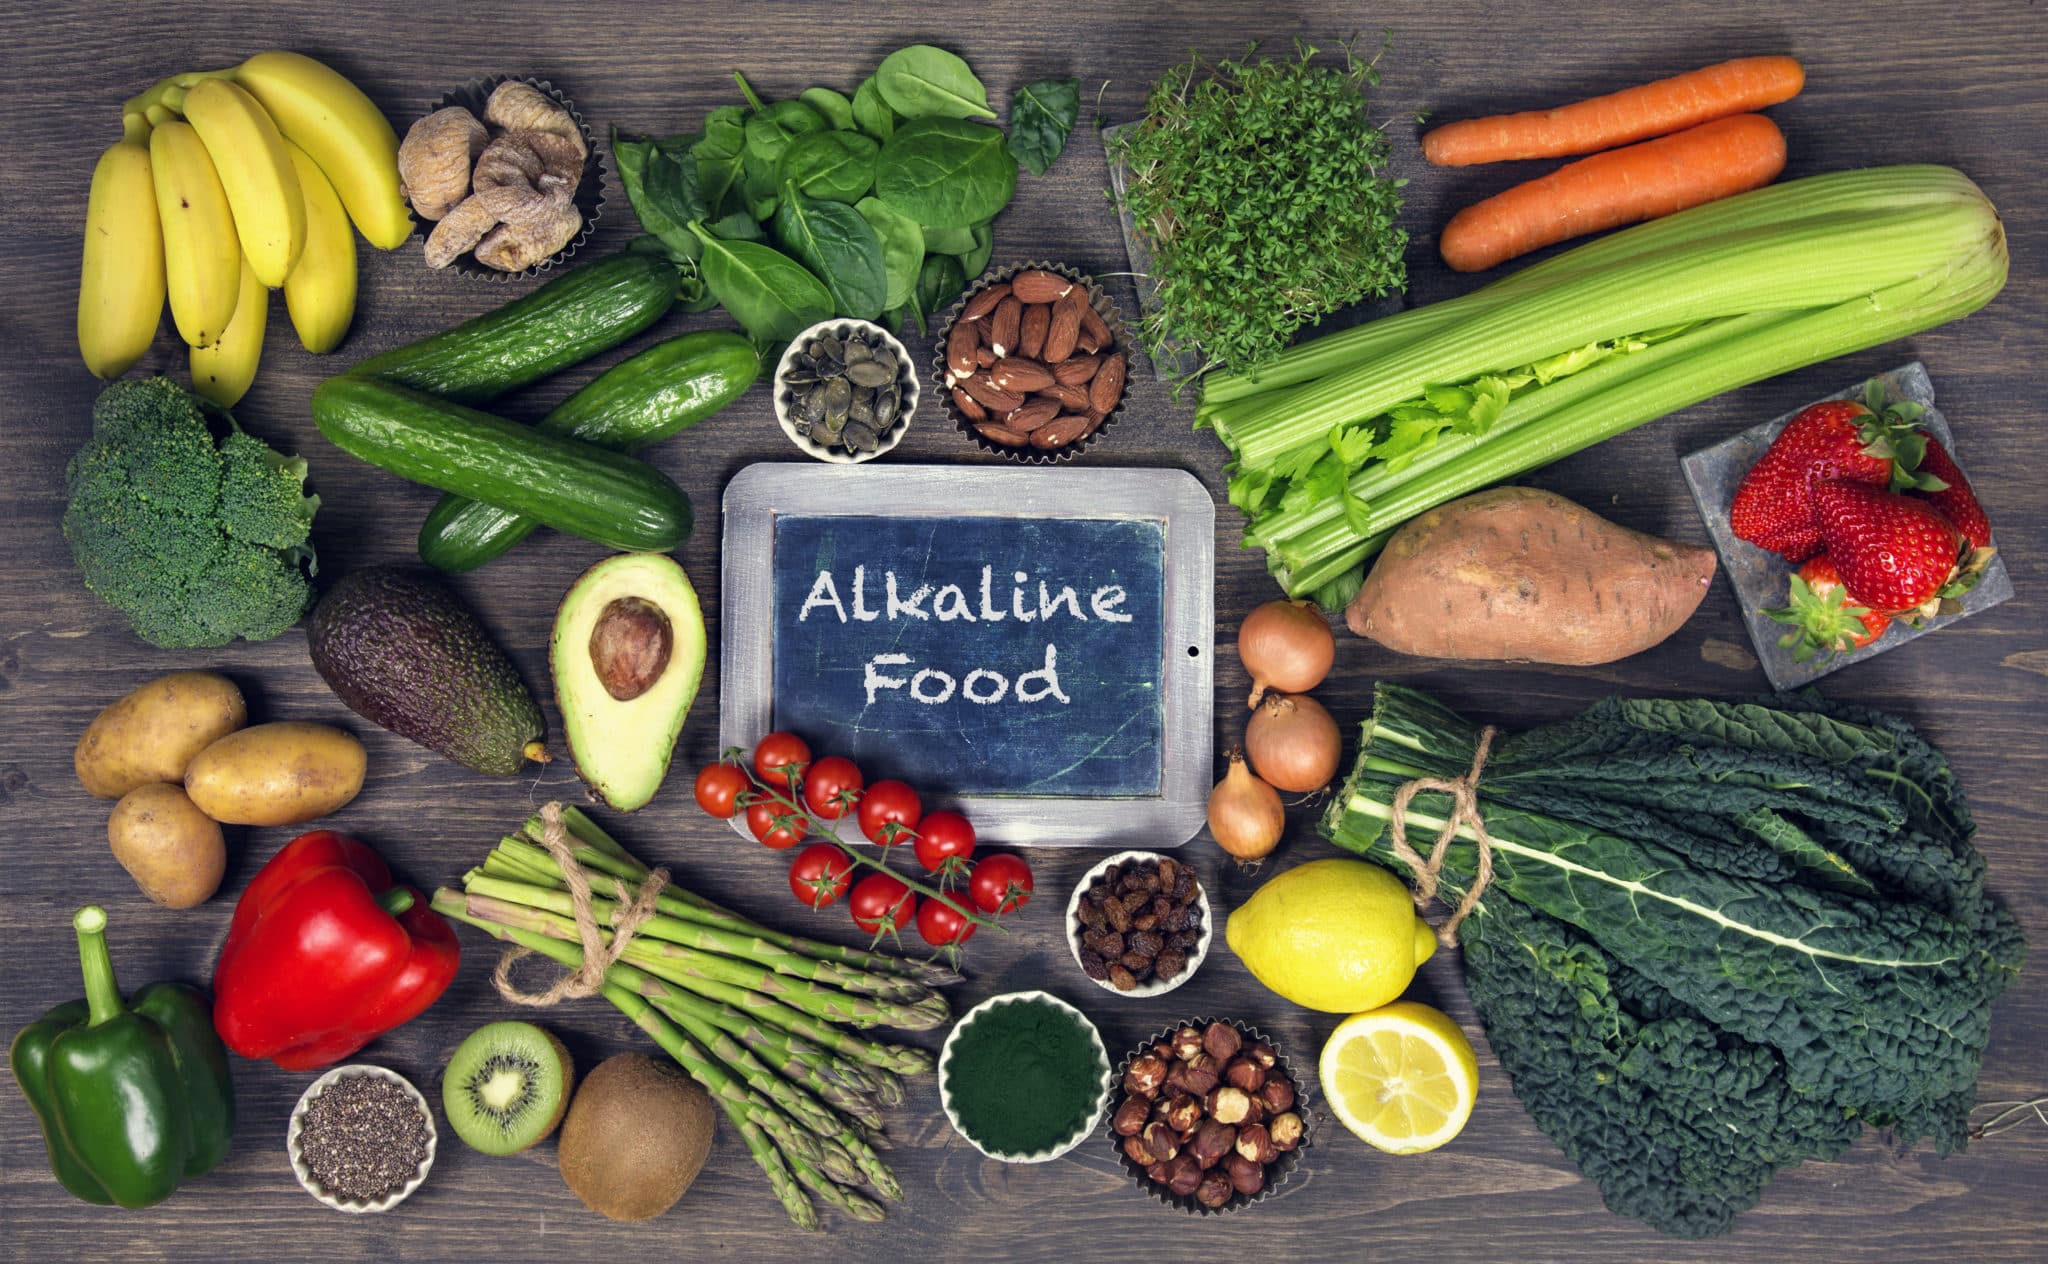 Various fruits and vegetables on dark surface with chalkboard in the middle reading "Alkaline Food"